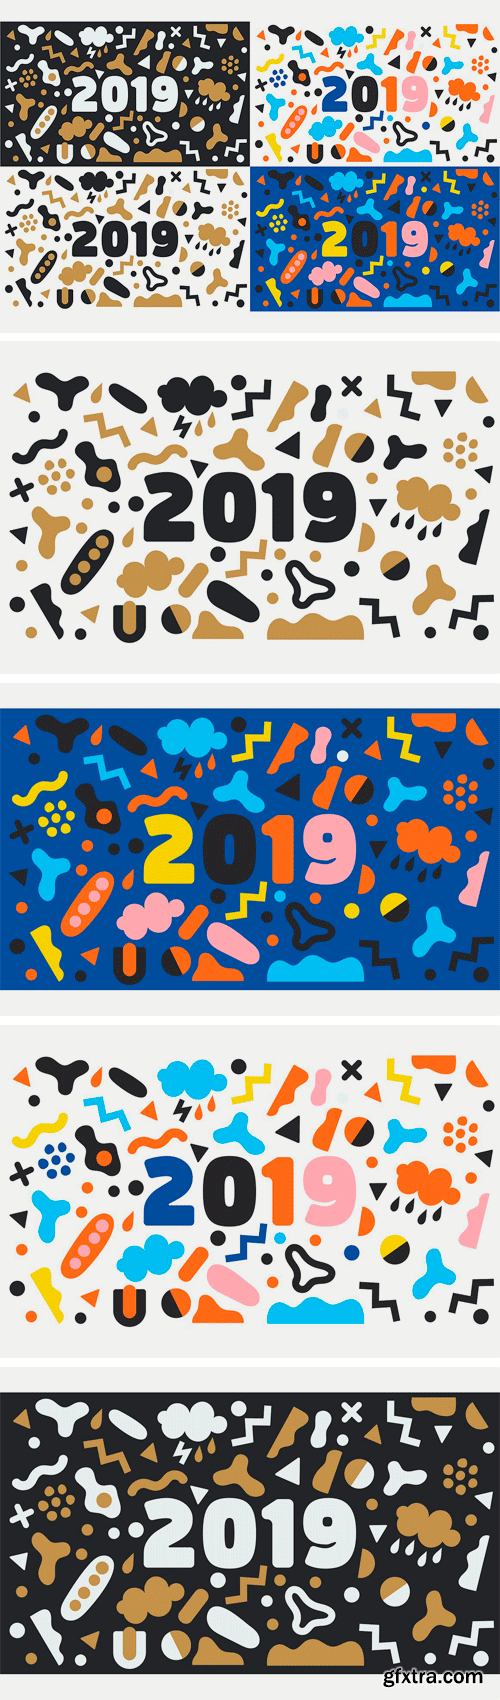 CM - 2019 New Year Vector Background Set 3020130